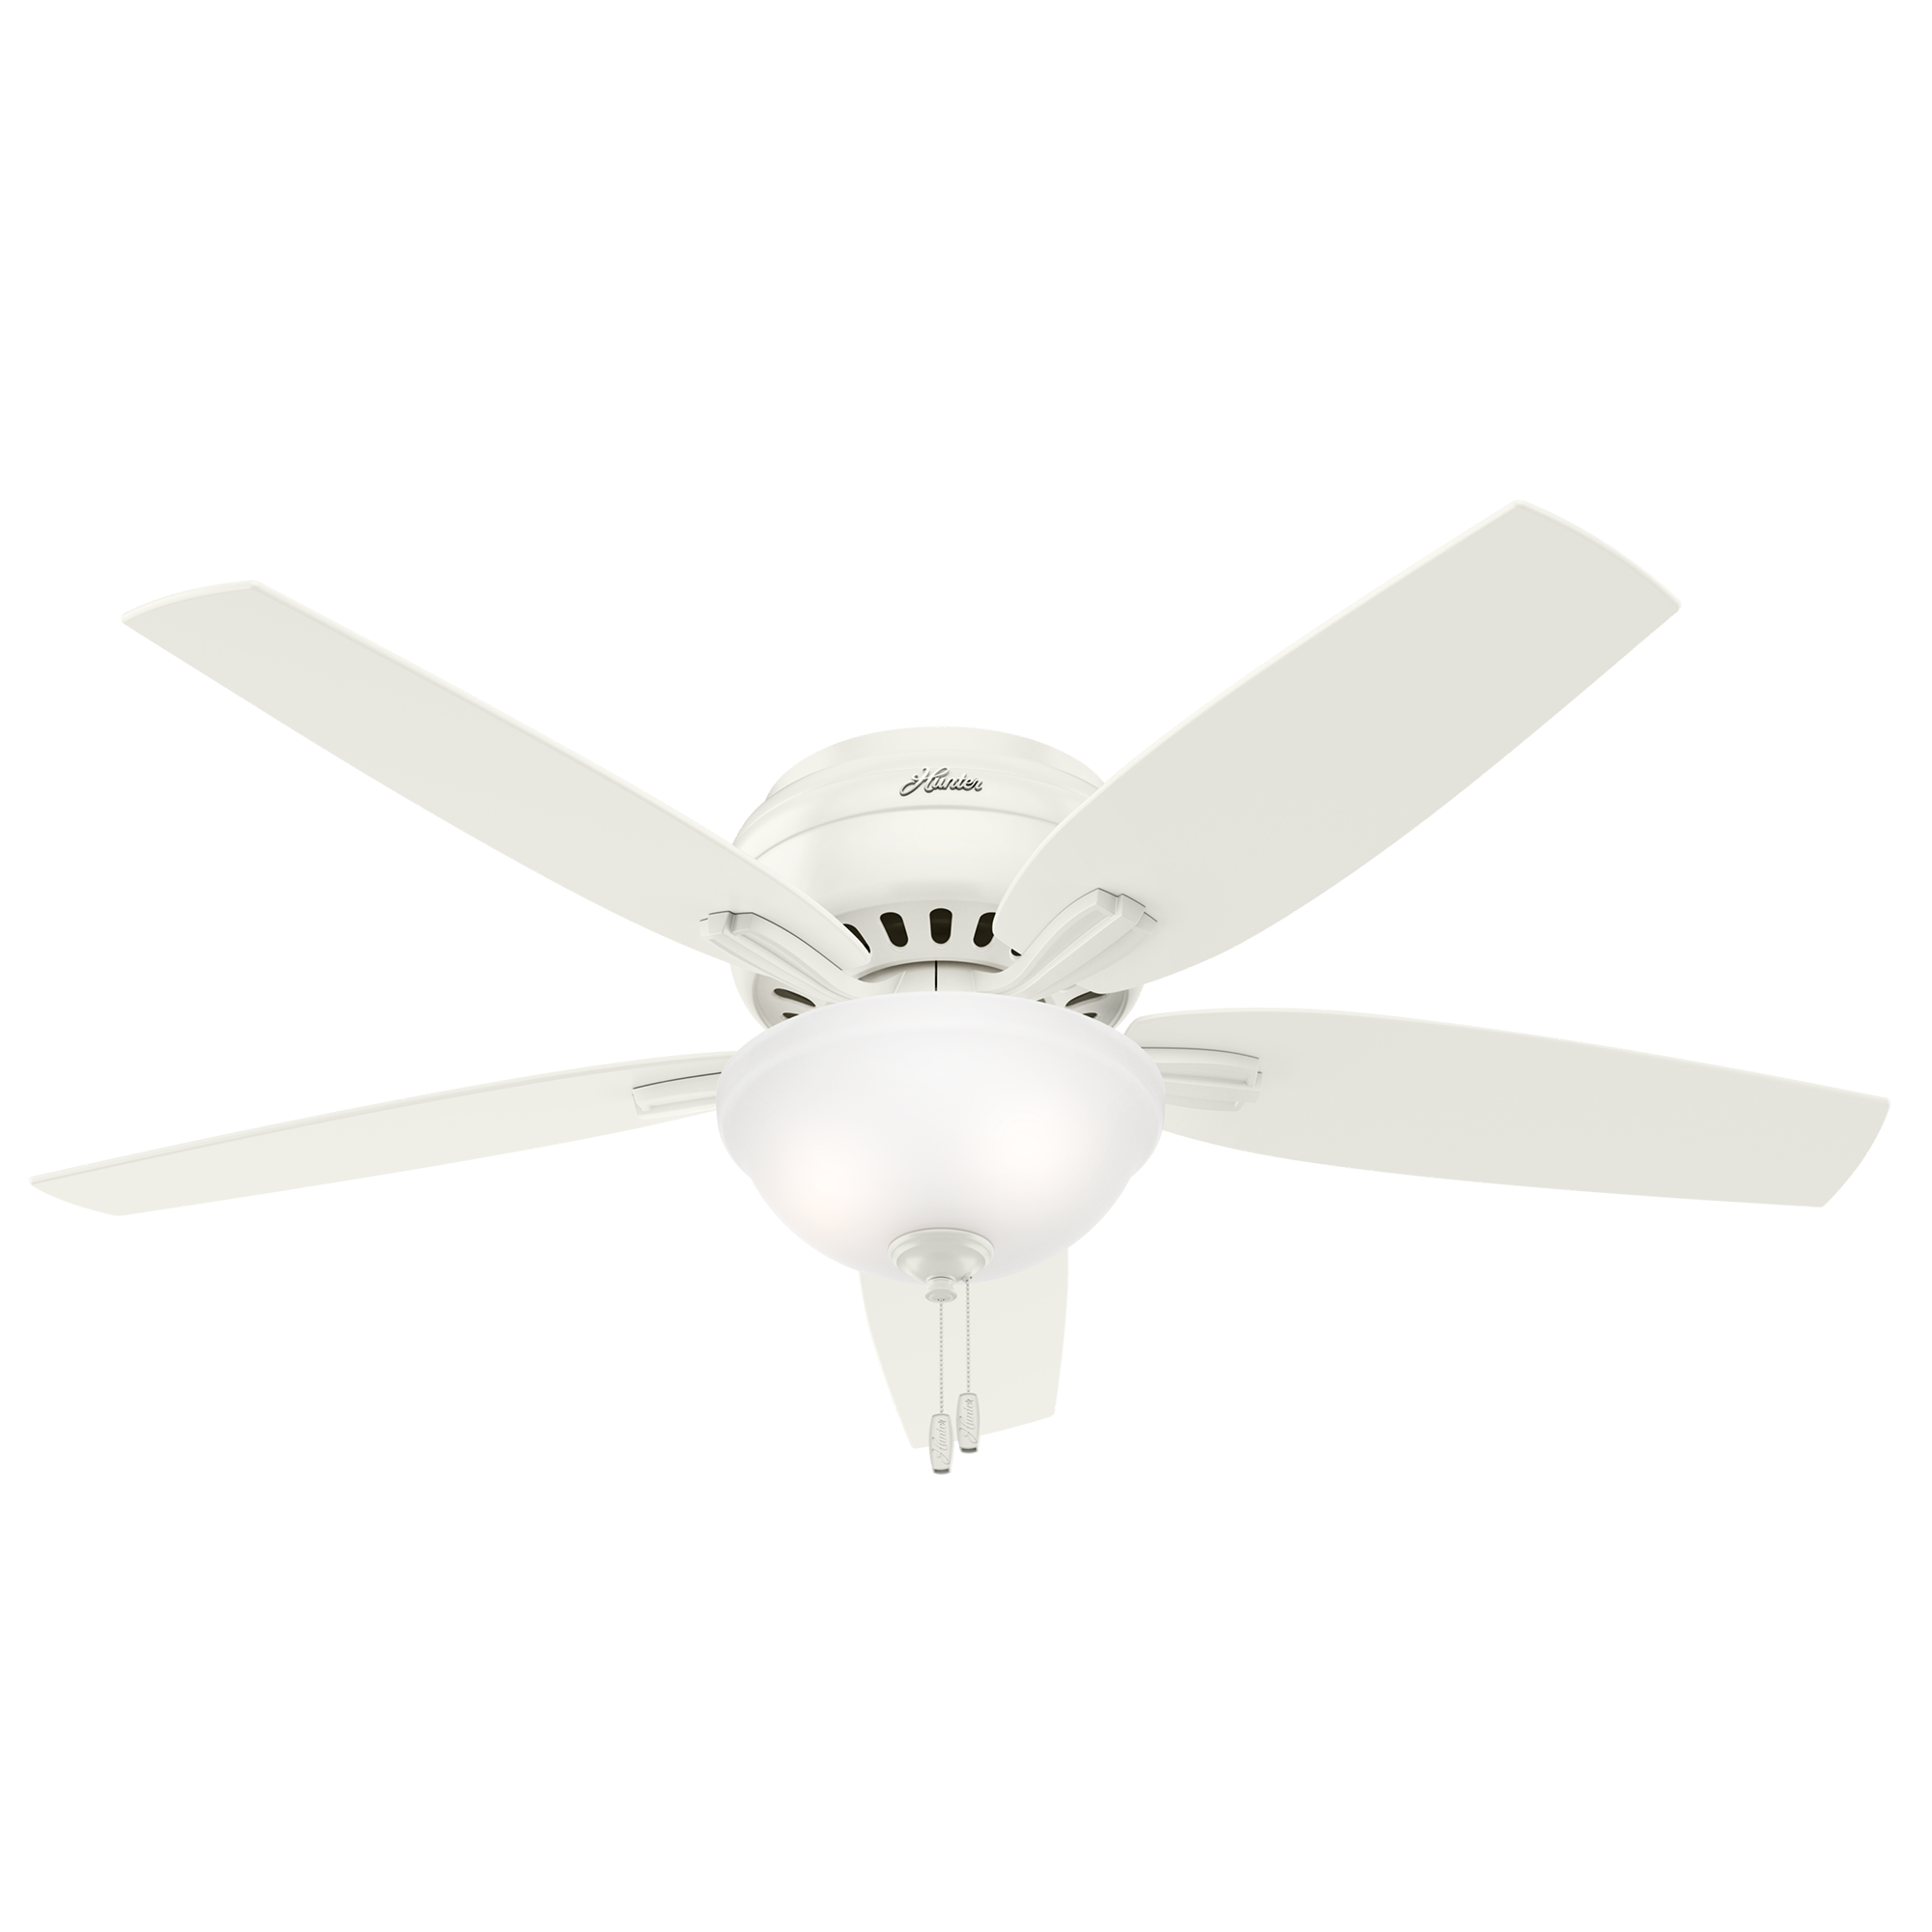 Hunter 52 inch Newsome Low Profile Ceiling Fan with LED Light Kit and Pull Chain Ceiling Fan Hunter   